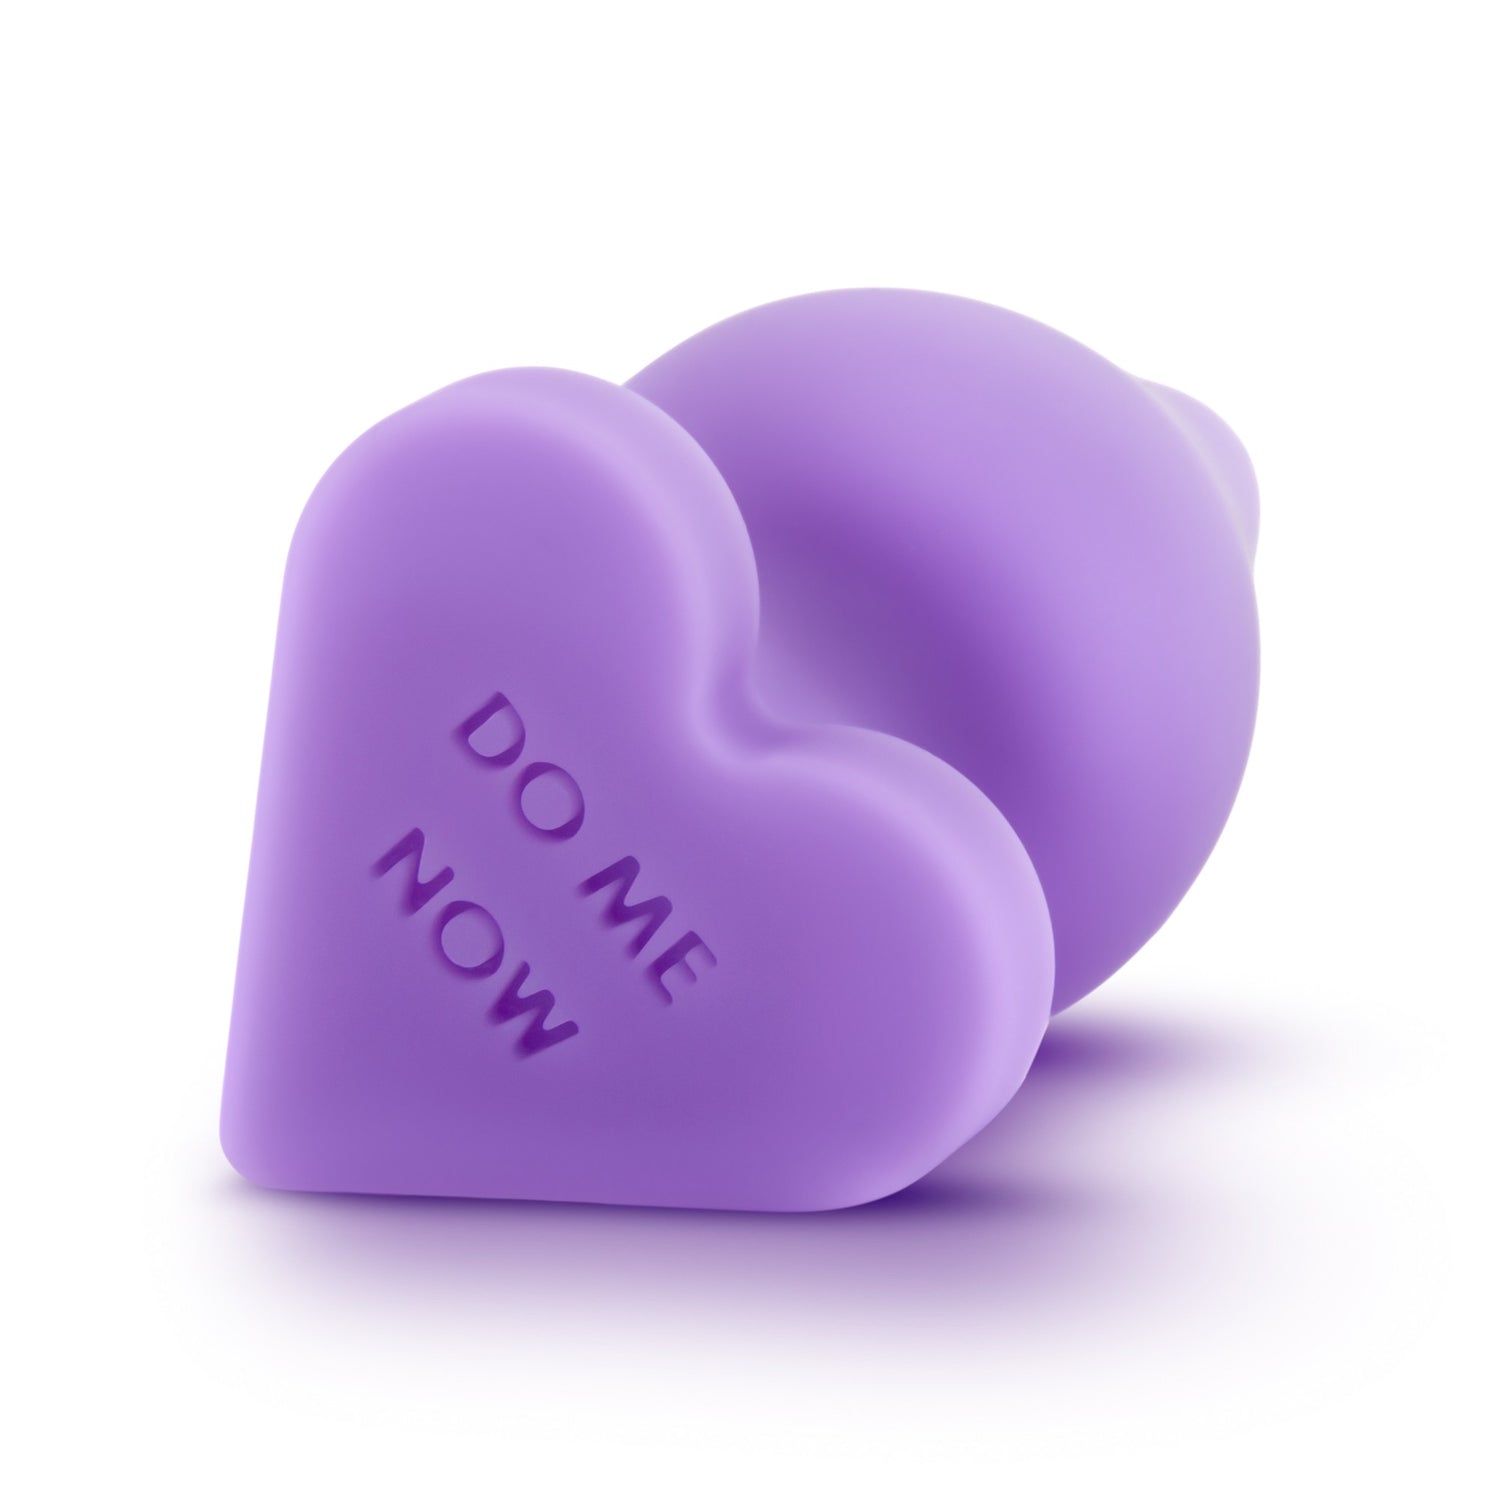 Naughty Candy Heart - Do Me Now - Just for you desires